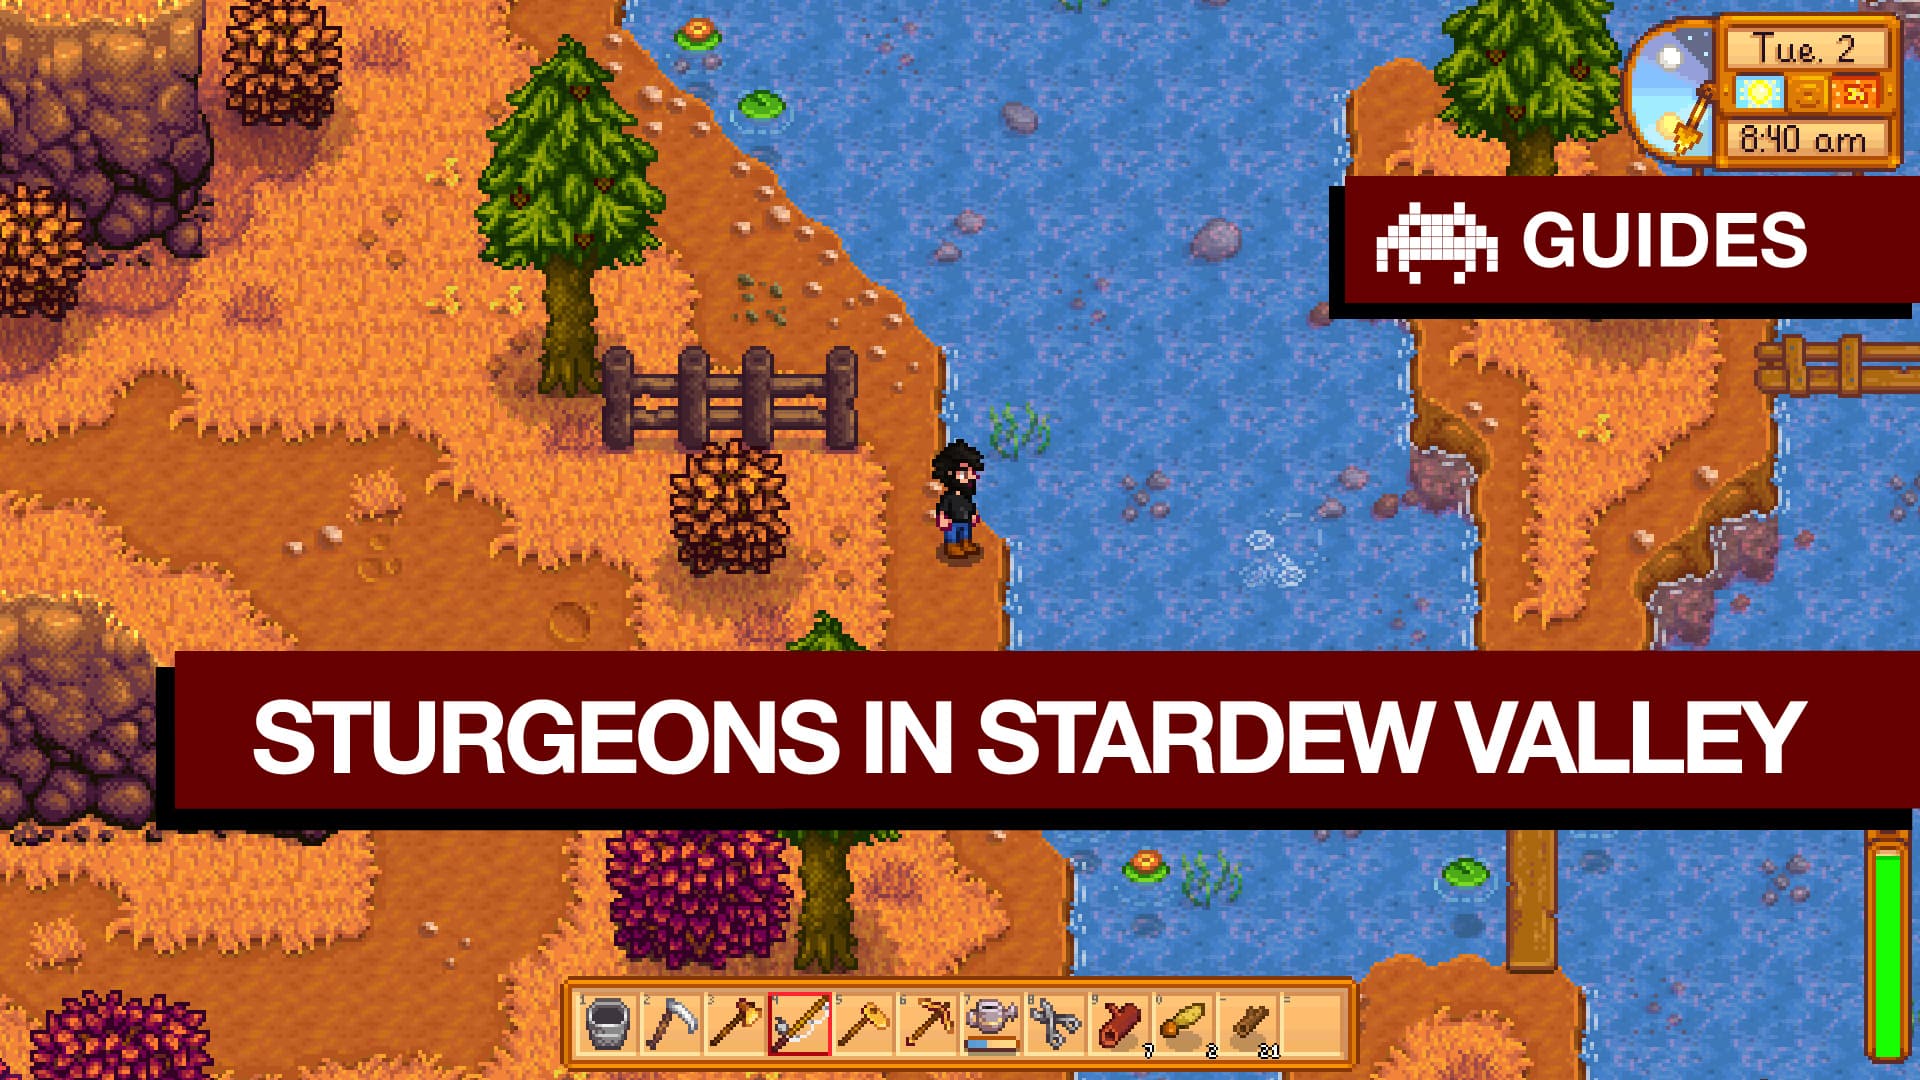 How to Catch Sturgeon in Stardew Valley, Game Guide